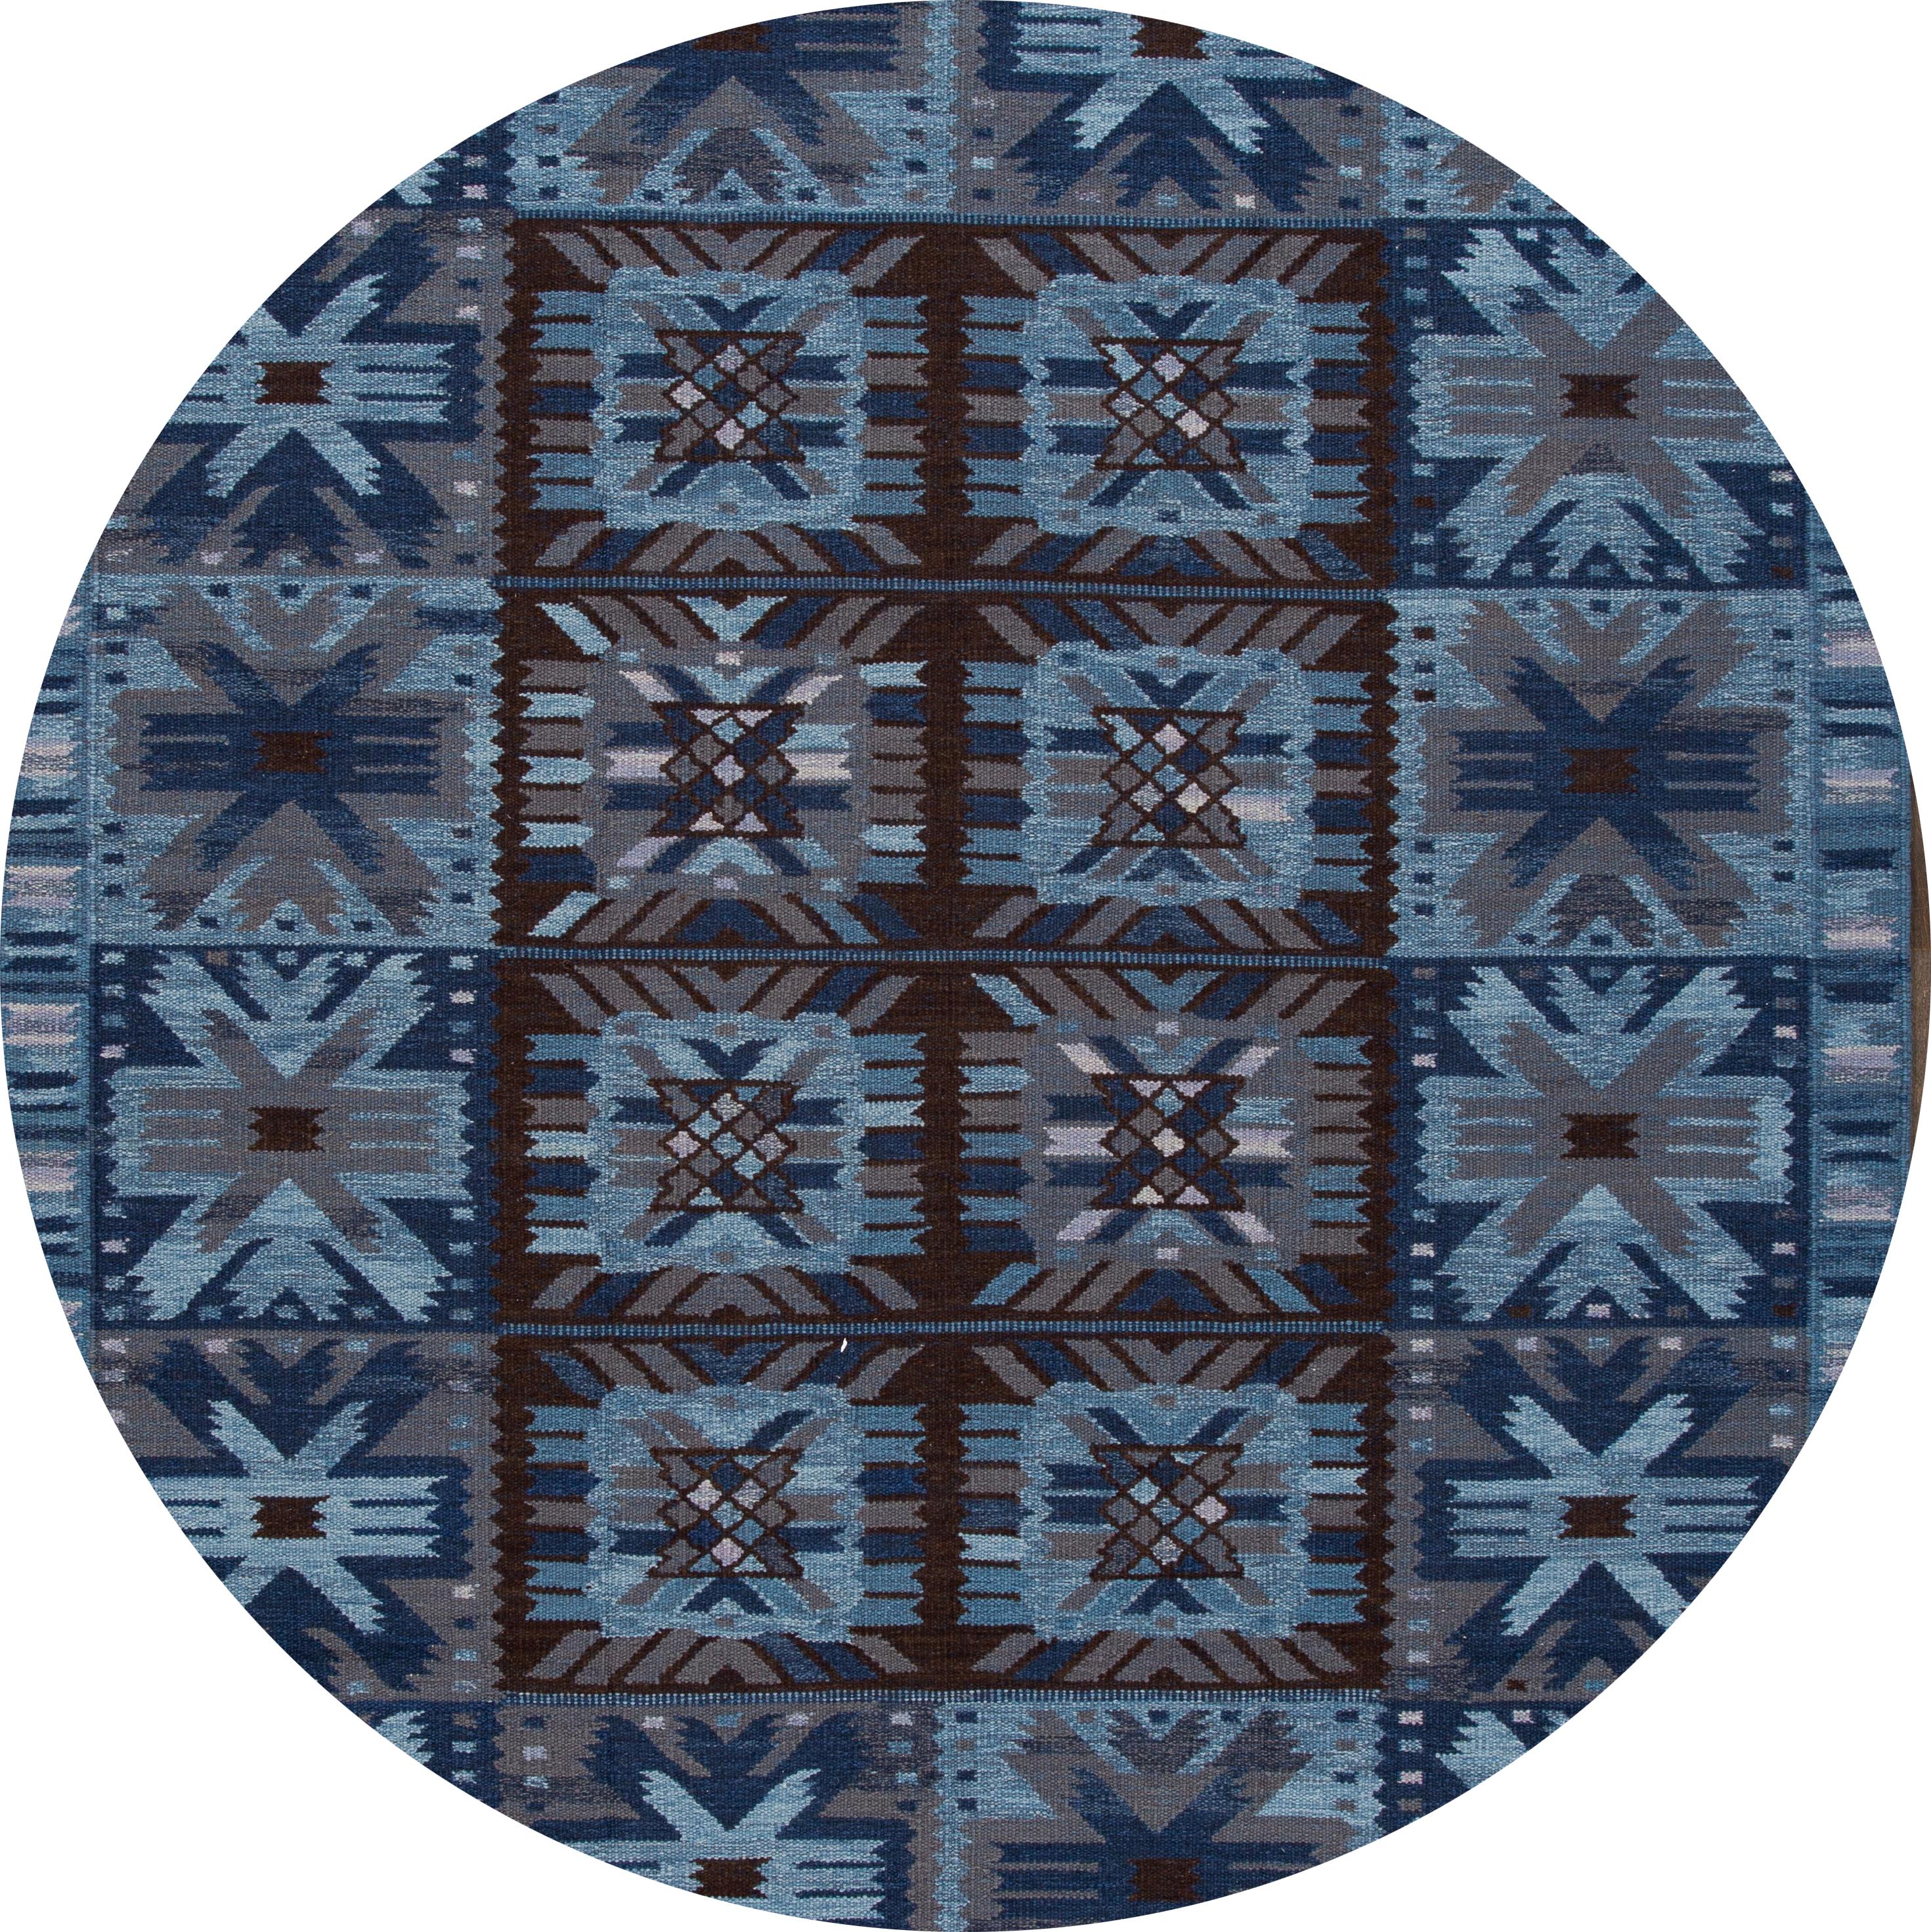 Beautiful 21st century modern Swedish hand knotted wool rug with a blue field, brown, and gray accents in all-over geometric design

This rug measures: 9'5